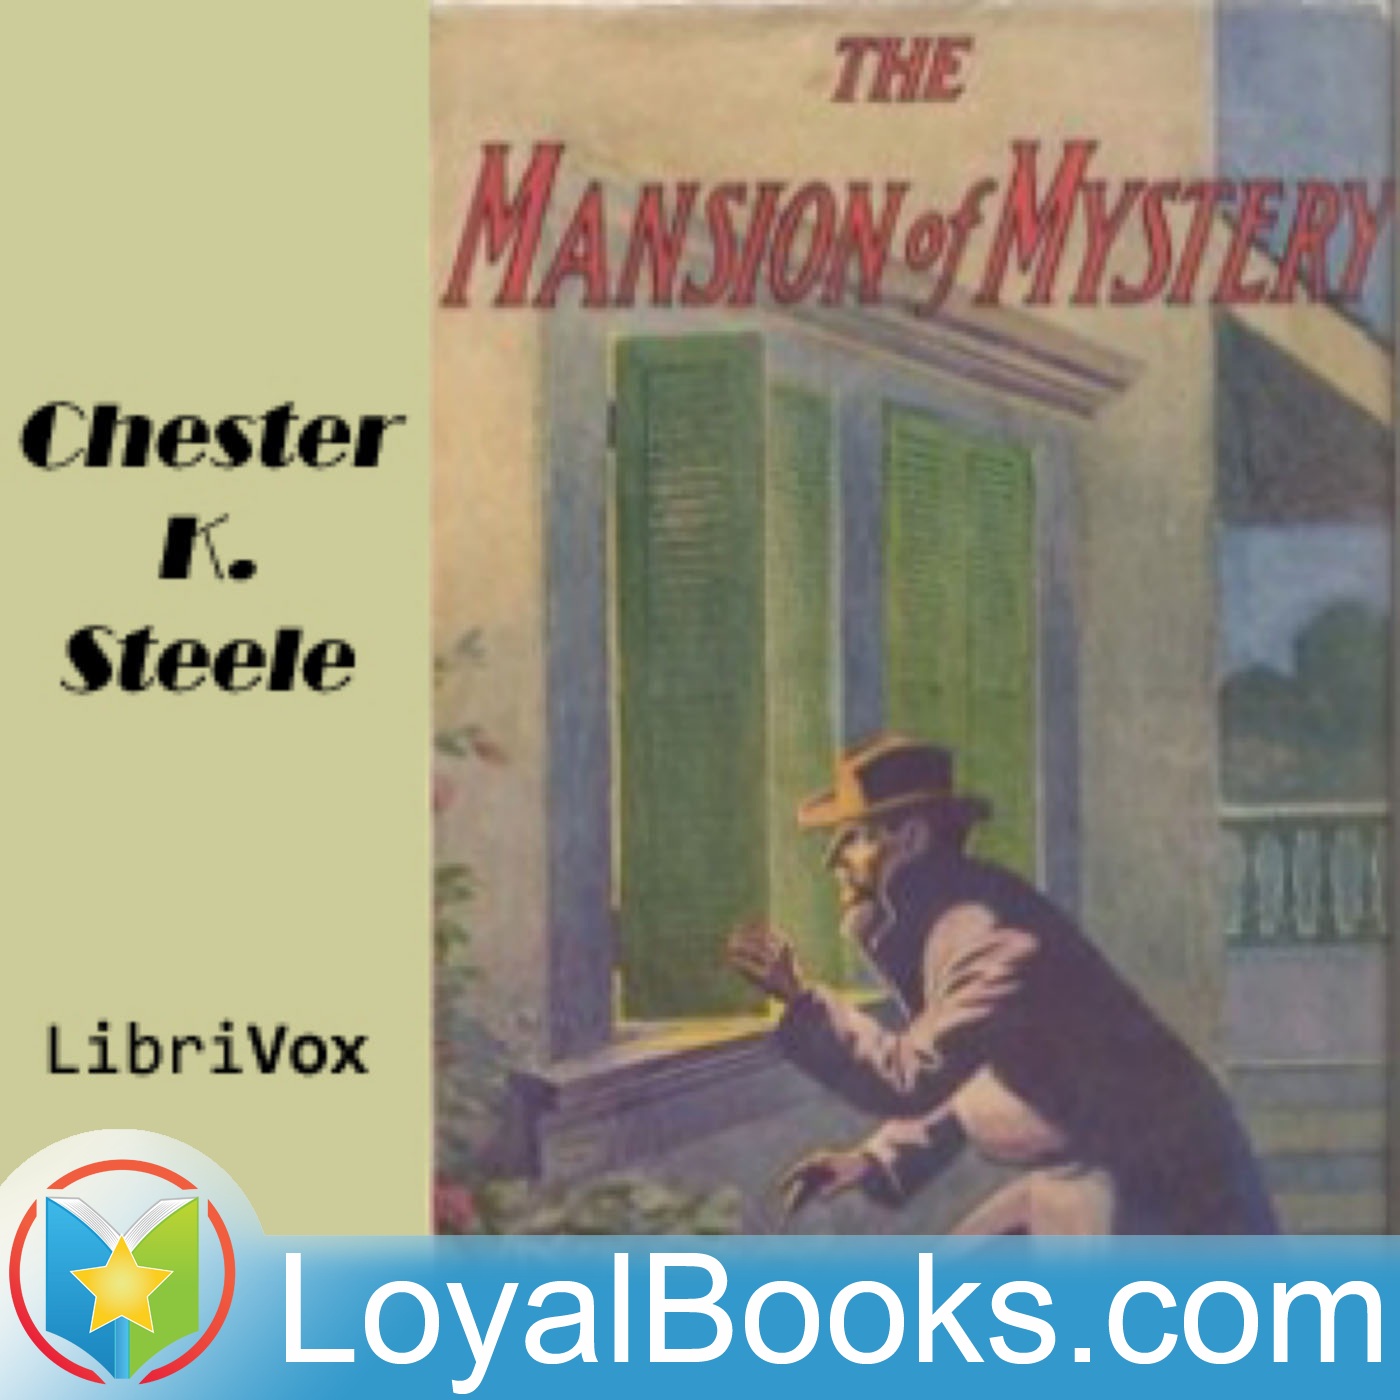 The Mansion of Mystery by Chester K. Steele